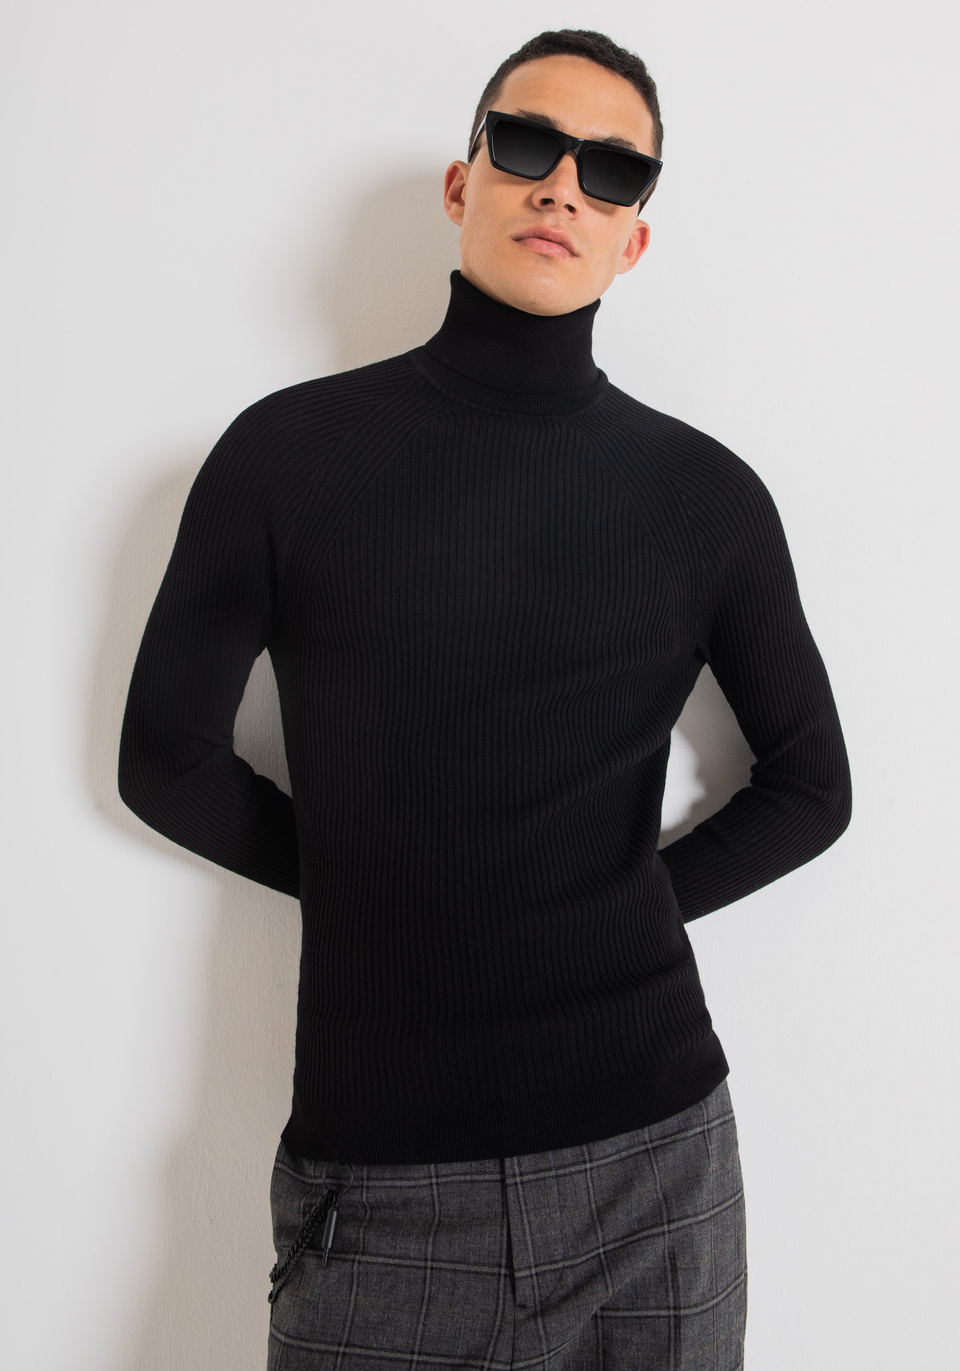 HIHG-NECK SWEATER WITH RIBBED PROCESSING - Antony Morato Online Shop